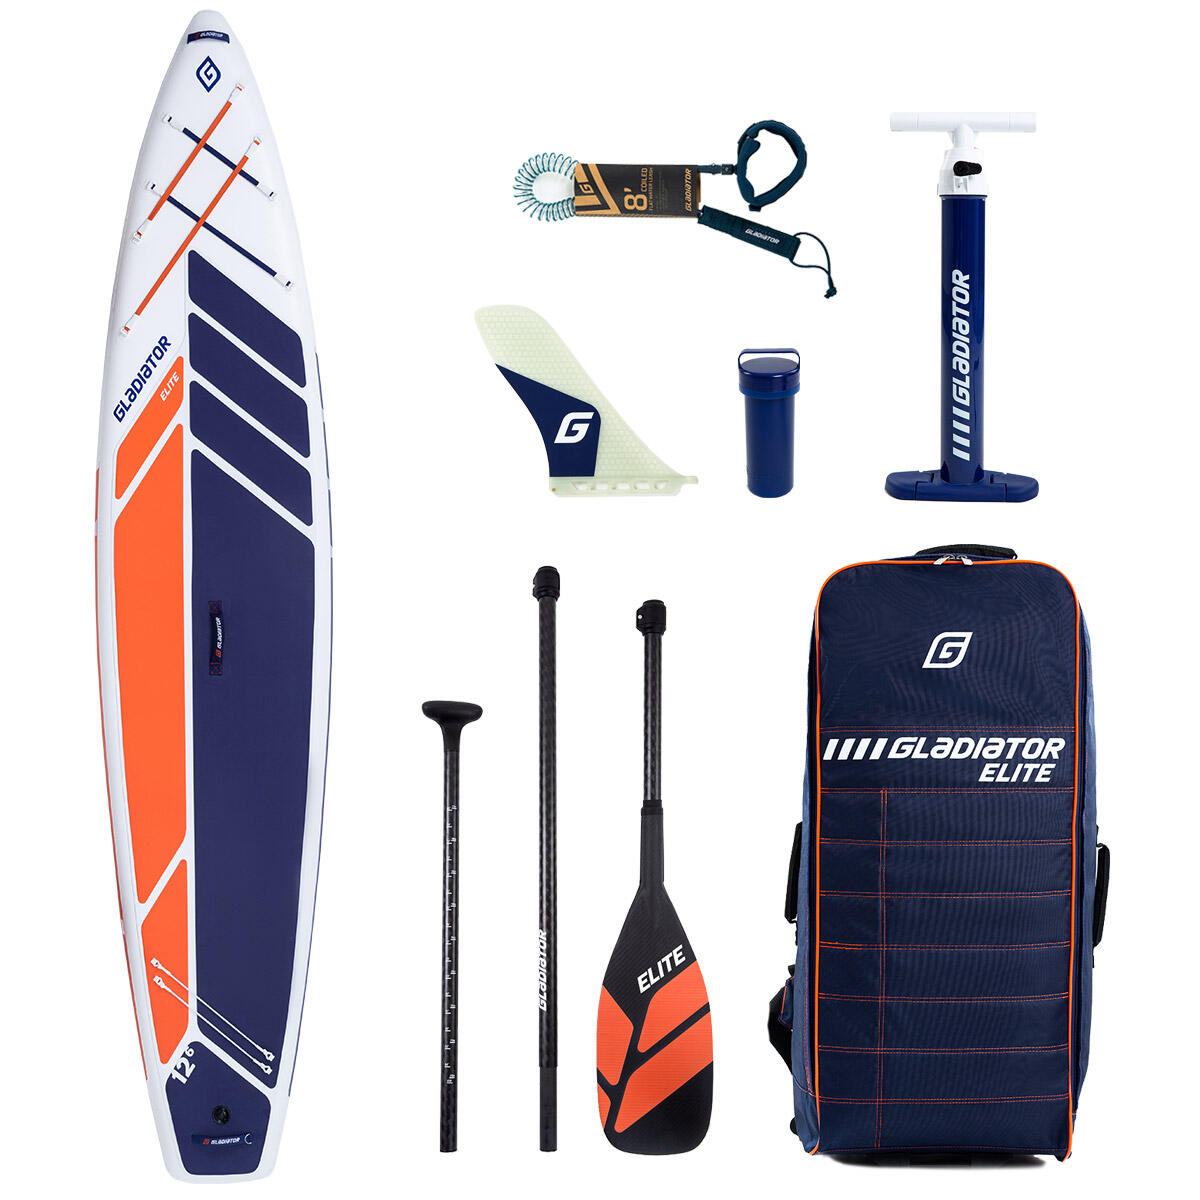 GLADIATOR Gladiator Elite Touring 12'6 x 32” x 5.9” Touring Paddle Board For Stability